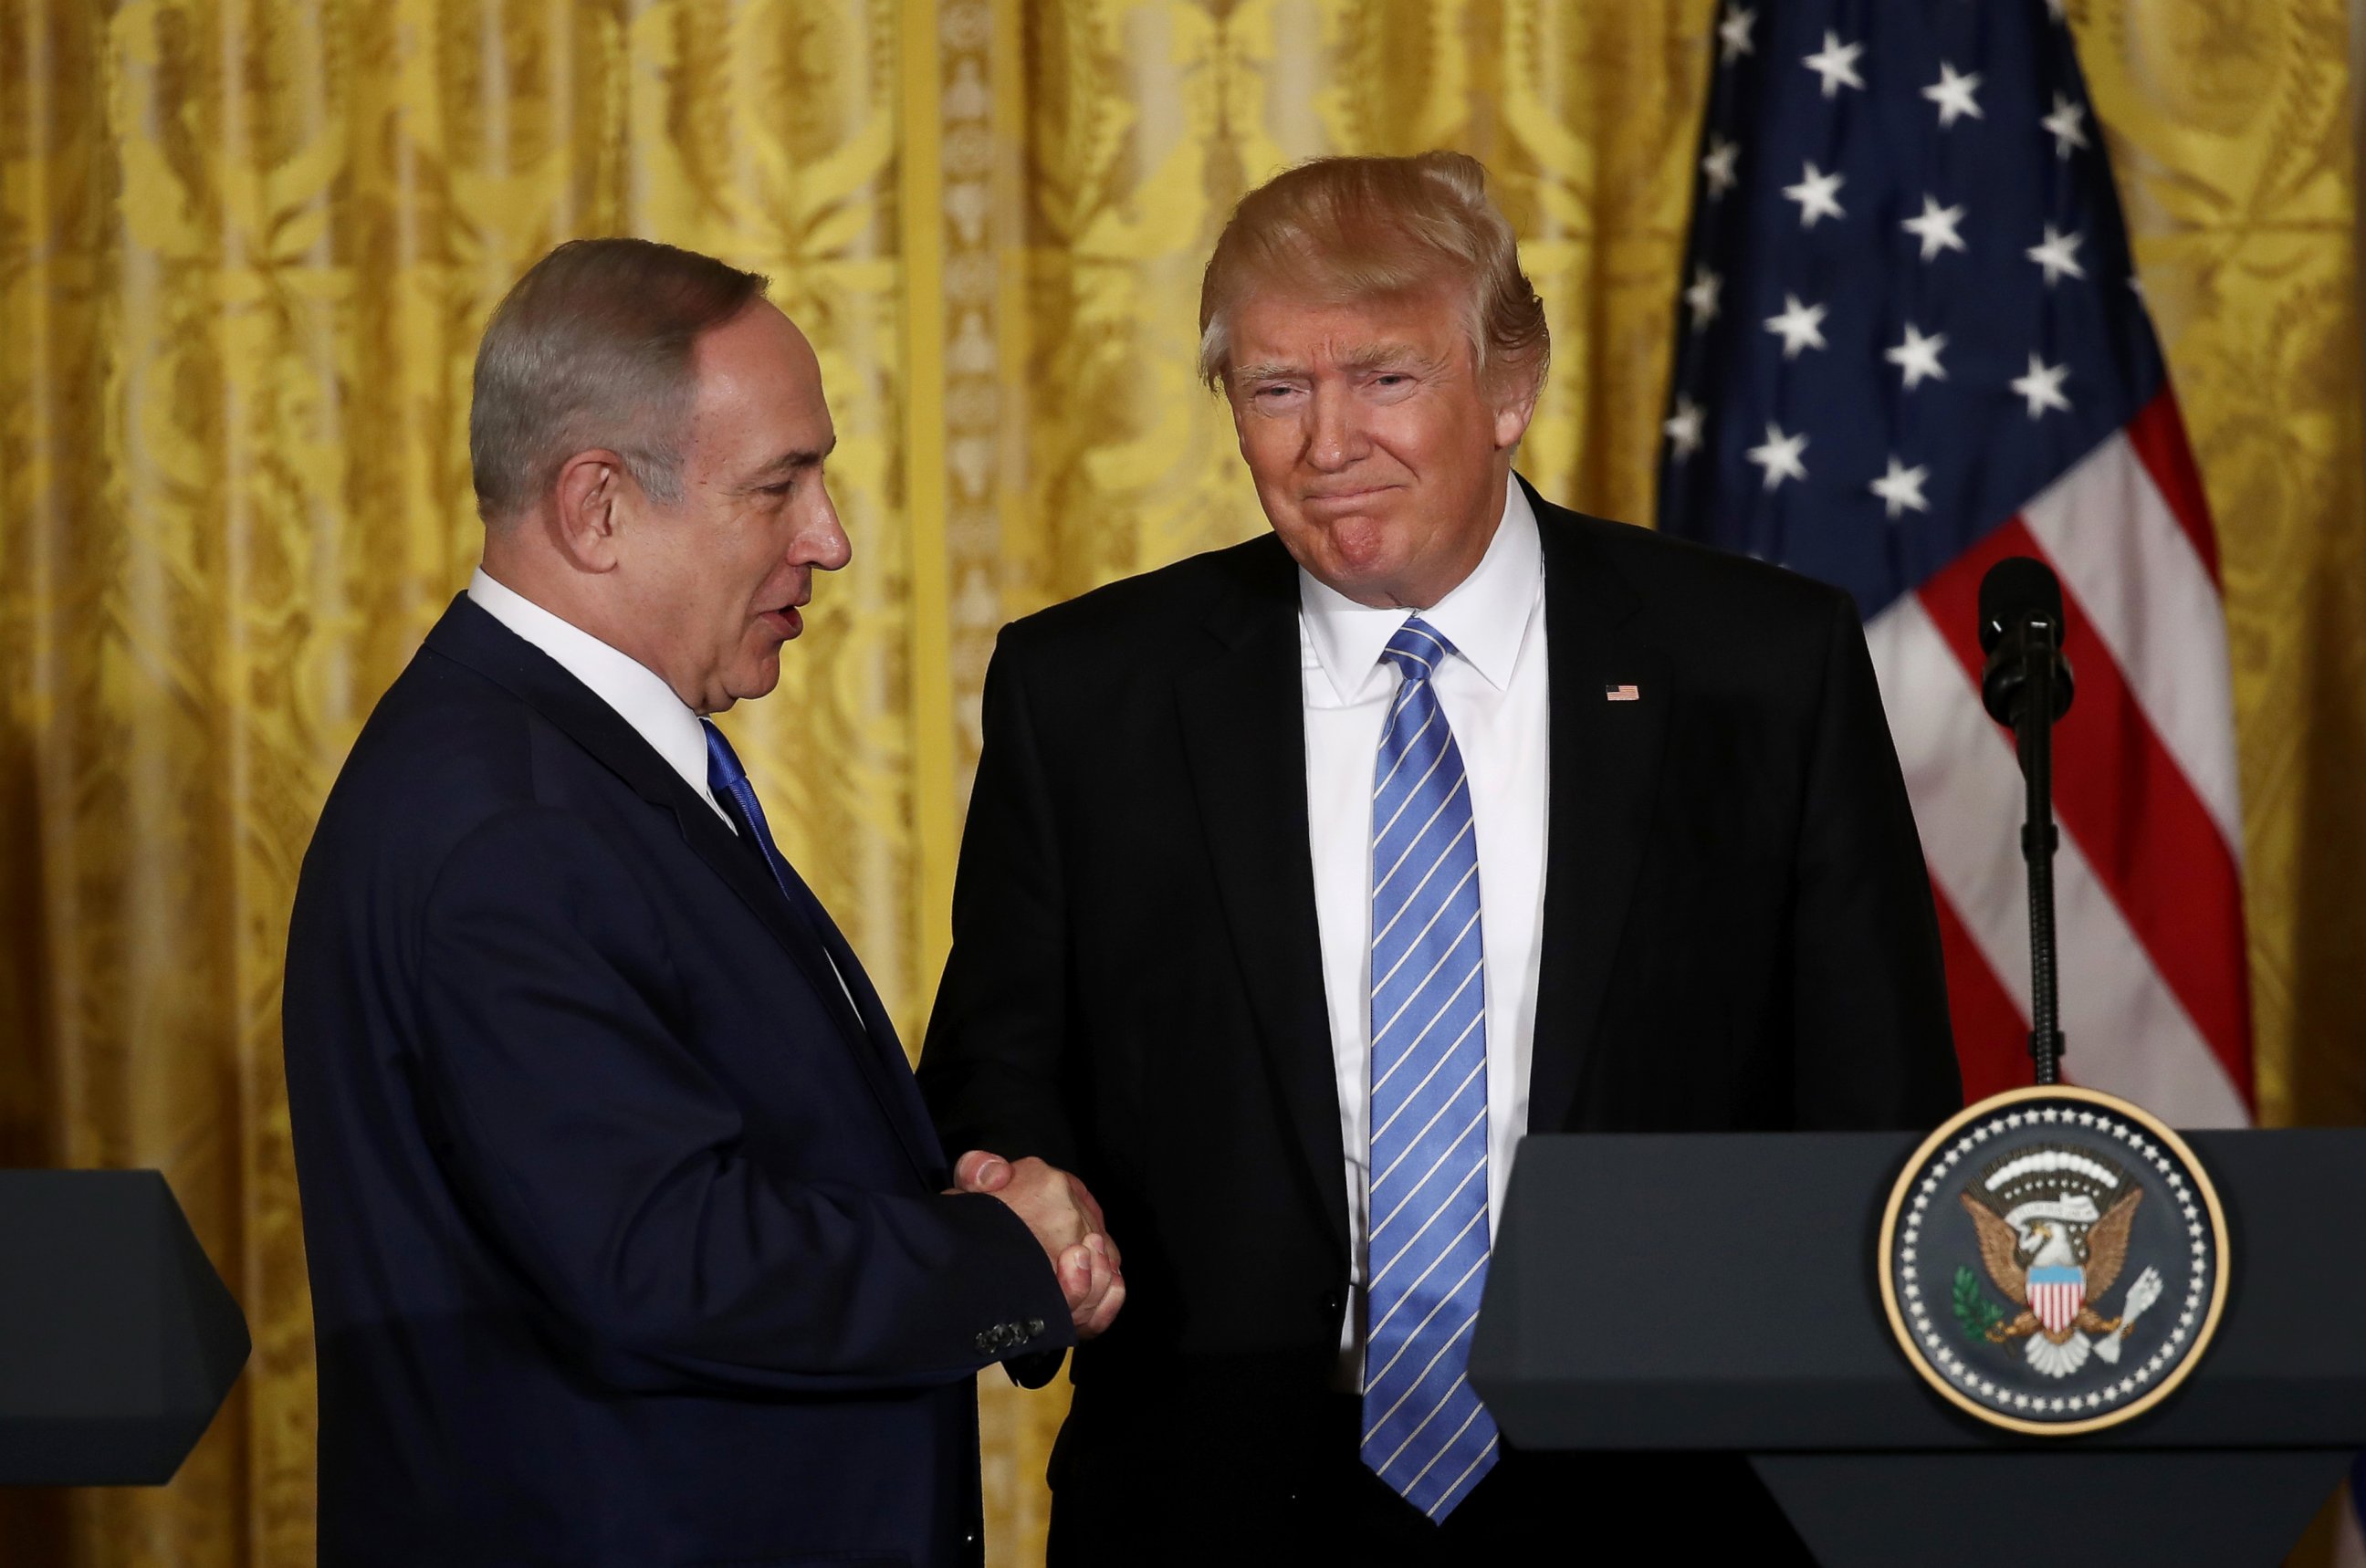 PHOTO: Israel Prime Minister Benjamin Netanyahu and President Donald Trump shake hands during a joint news conference at the East Room of the White House, Feb. 15, 2017, in Washington.